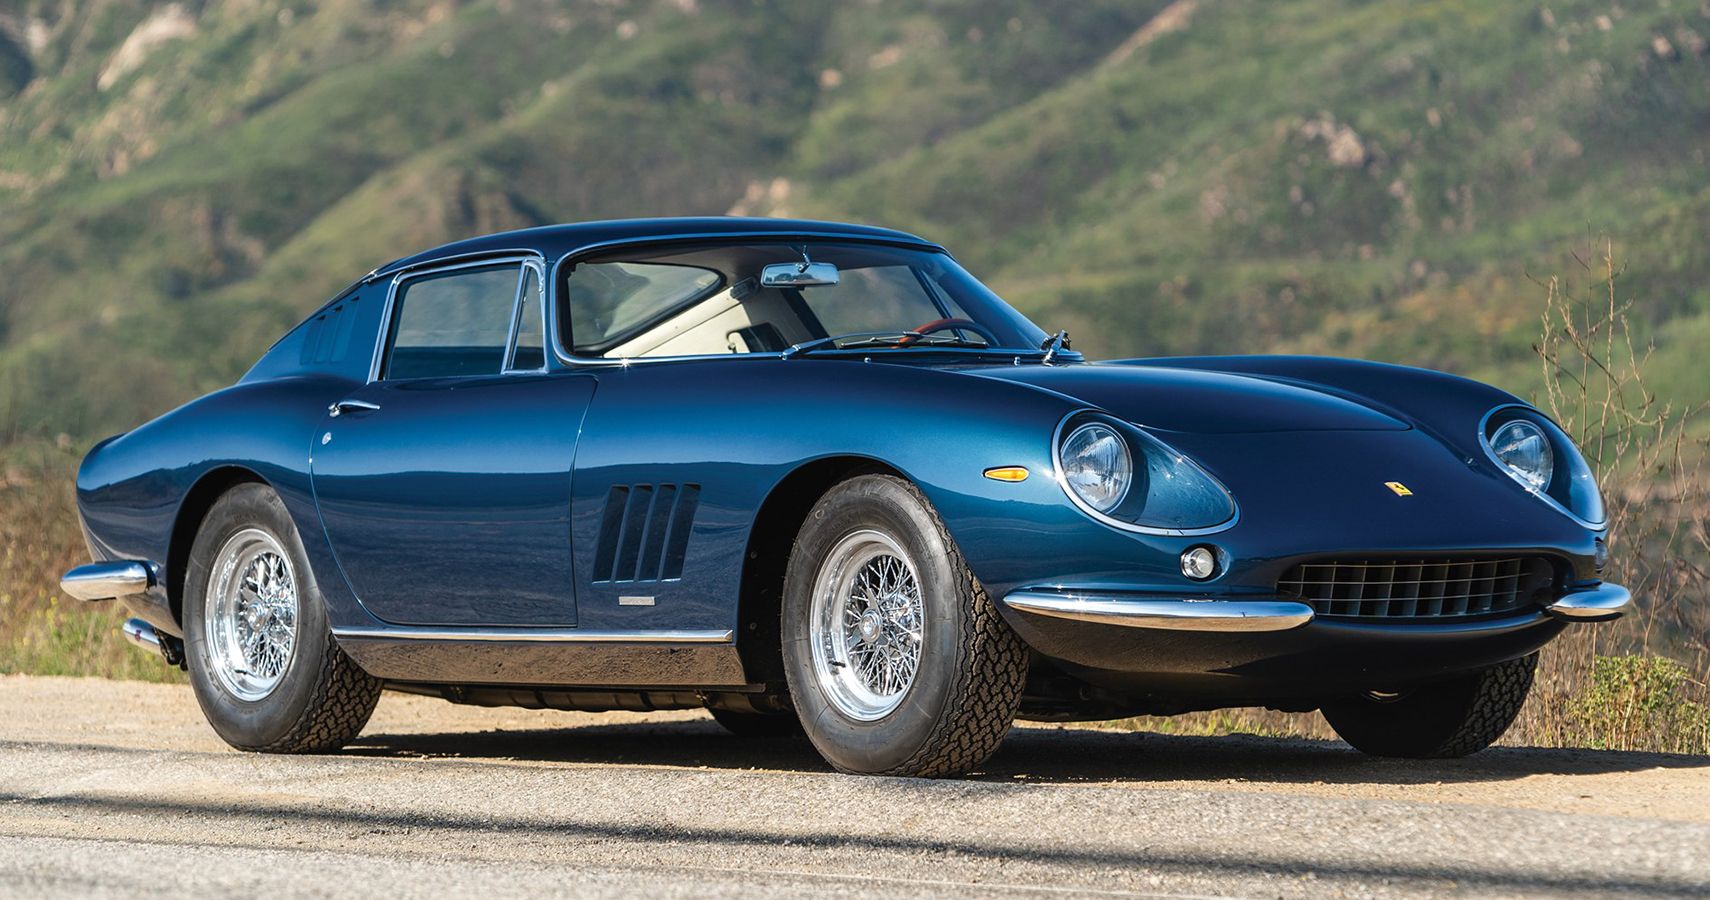 A 1966 275 GTB Long-Nose Sold For $3.08 Million At Gooding &amp; Company Online Auction In 2020 Making It The Most Expensive Car To Be Sold Online